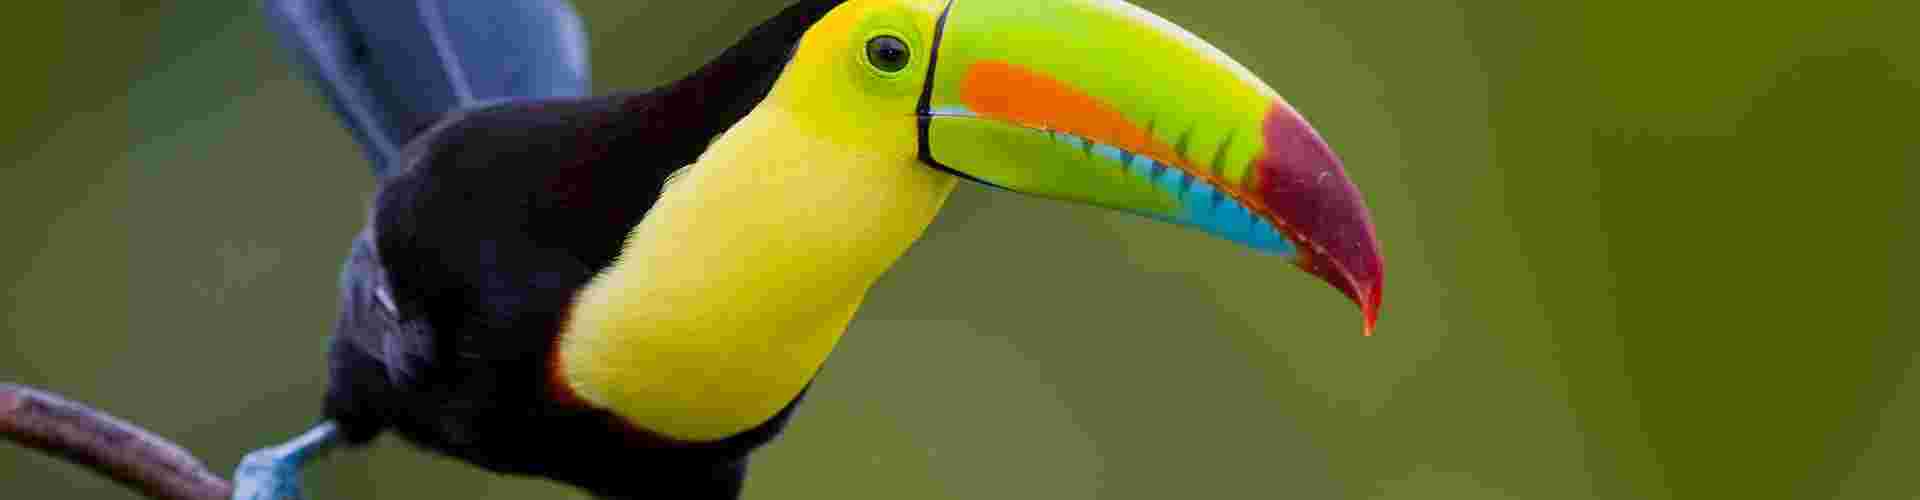 A colourful toucan perched on a branch 